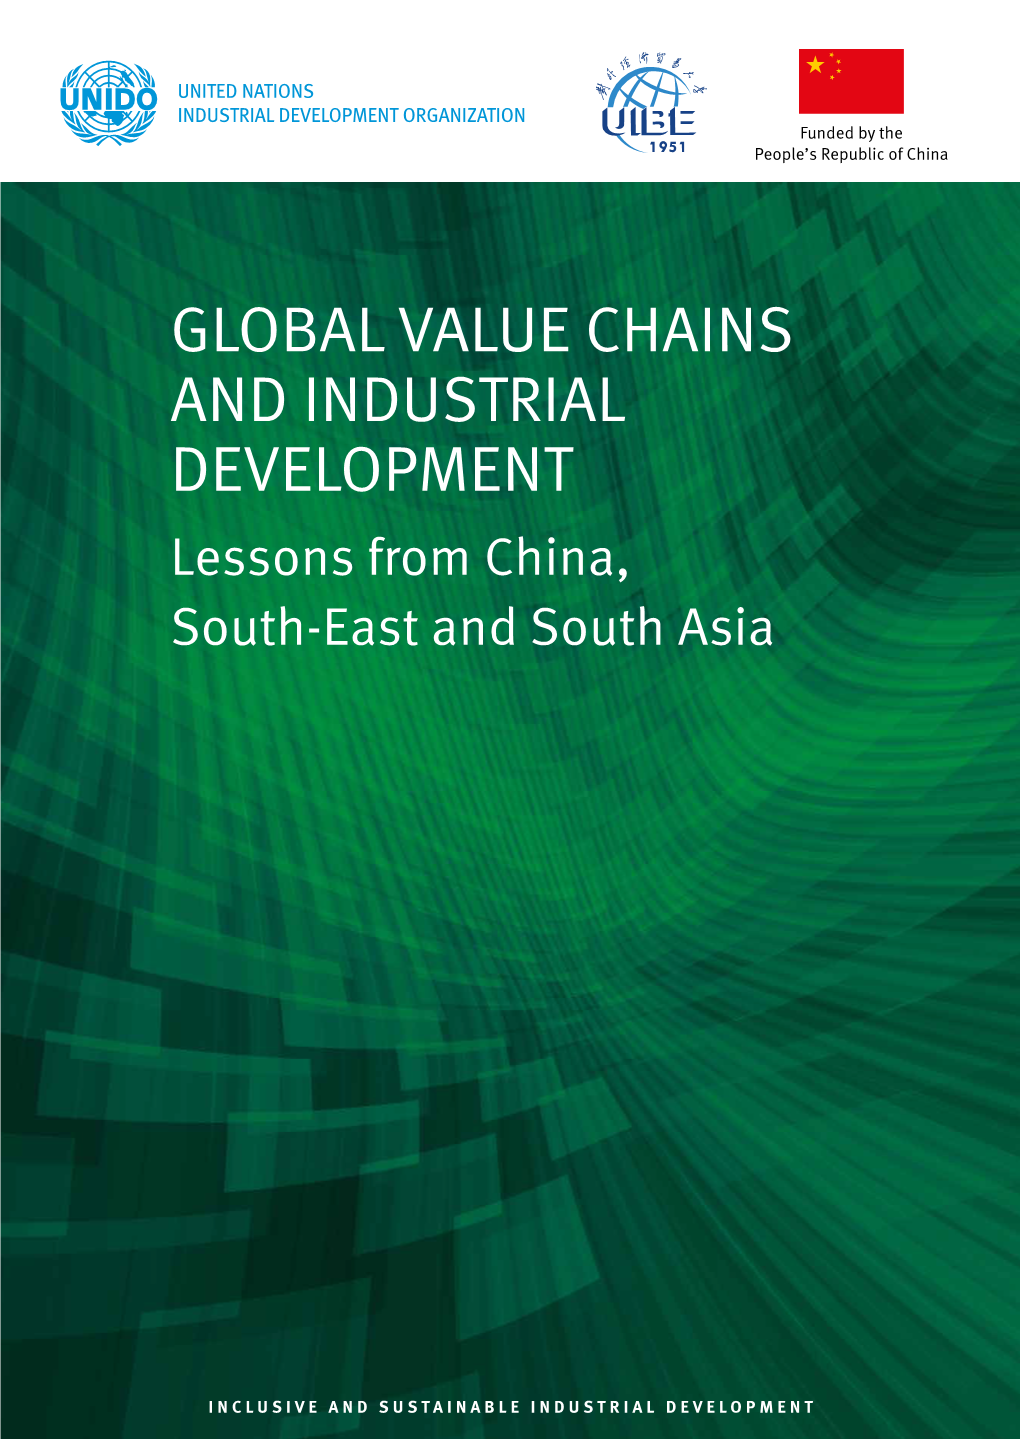 GLOBAL VALUE CHAINS and INDUSTRIAL DEVELOPMENT Lessons from China, South-East and South Asia